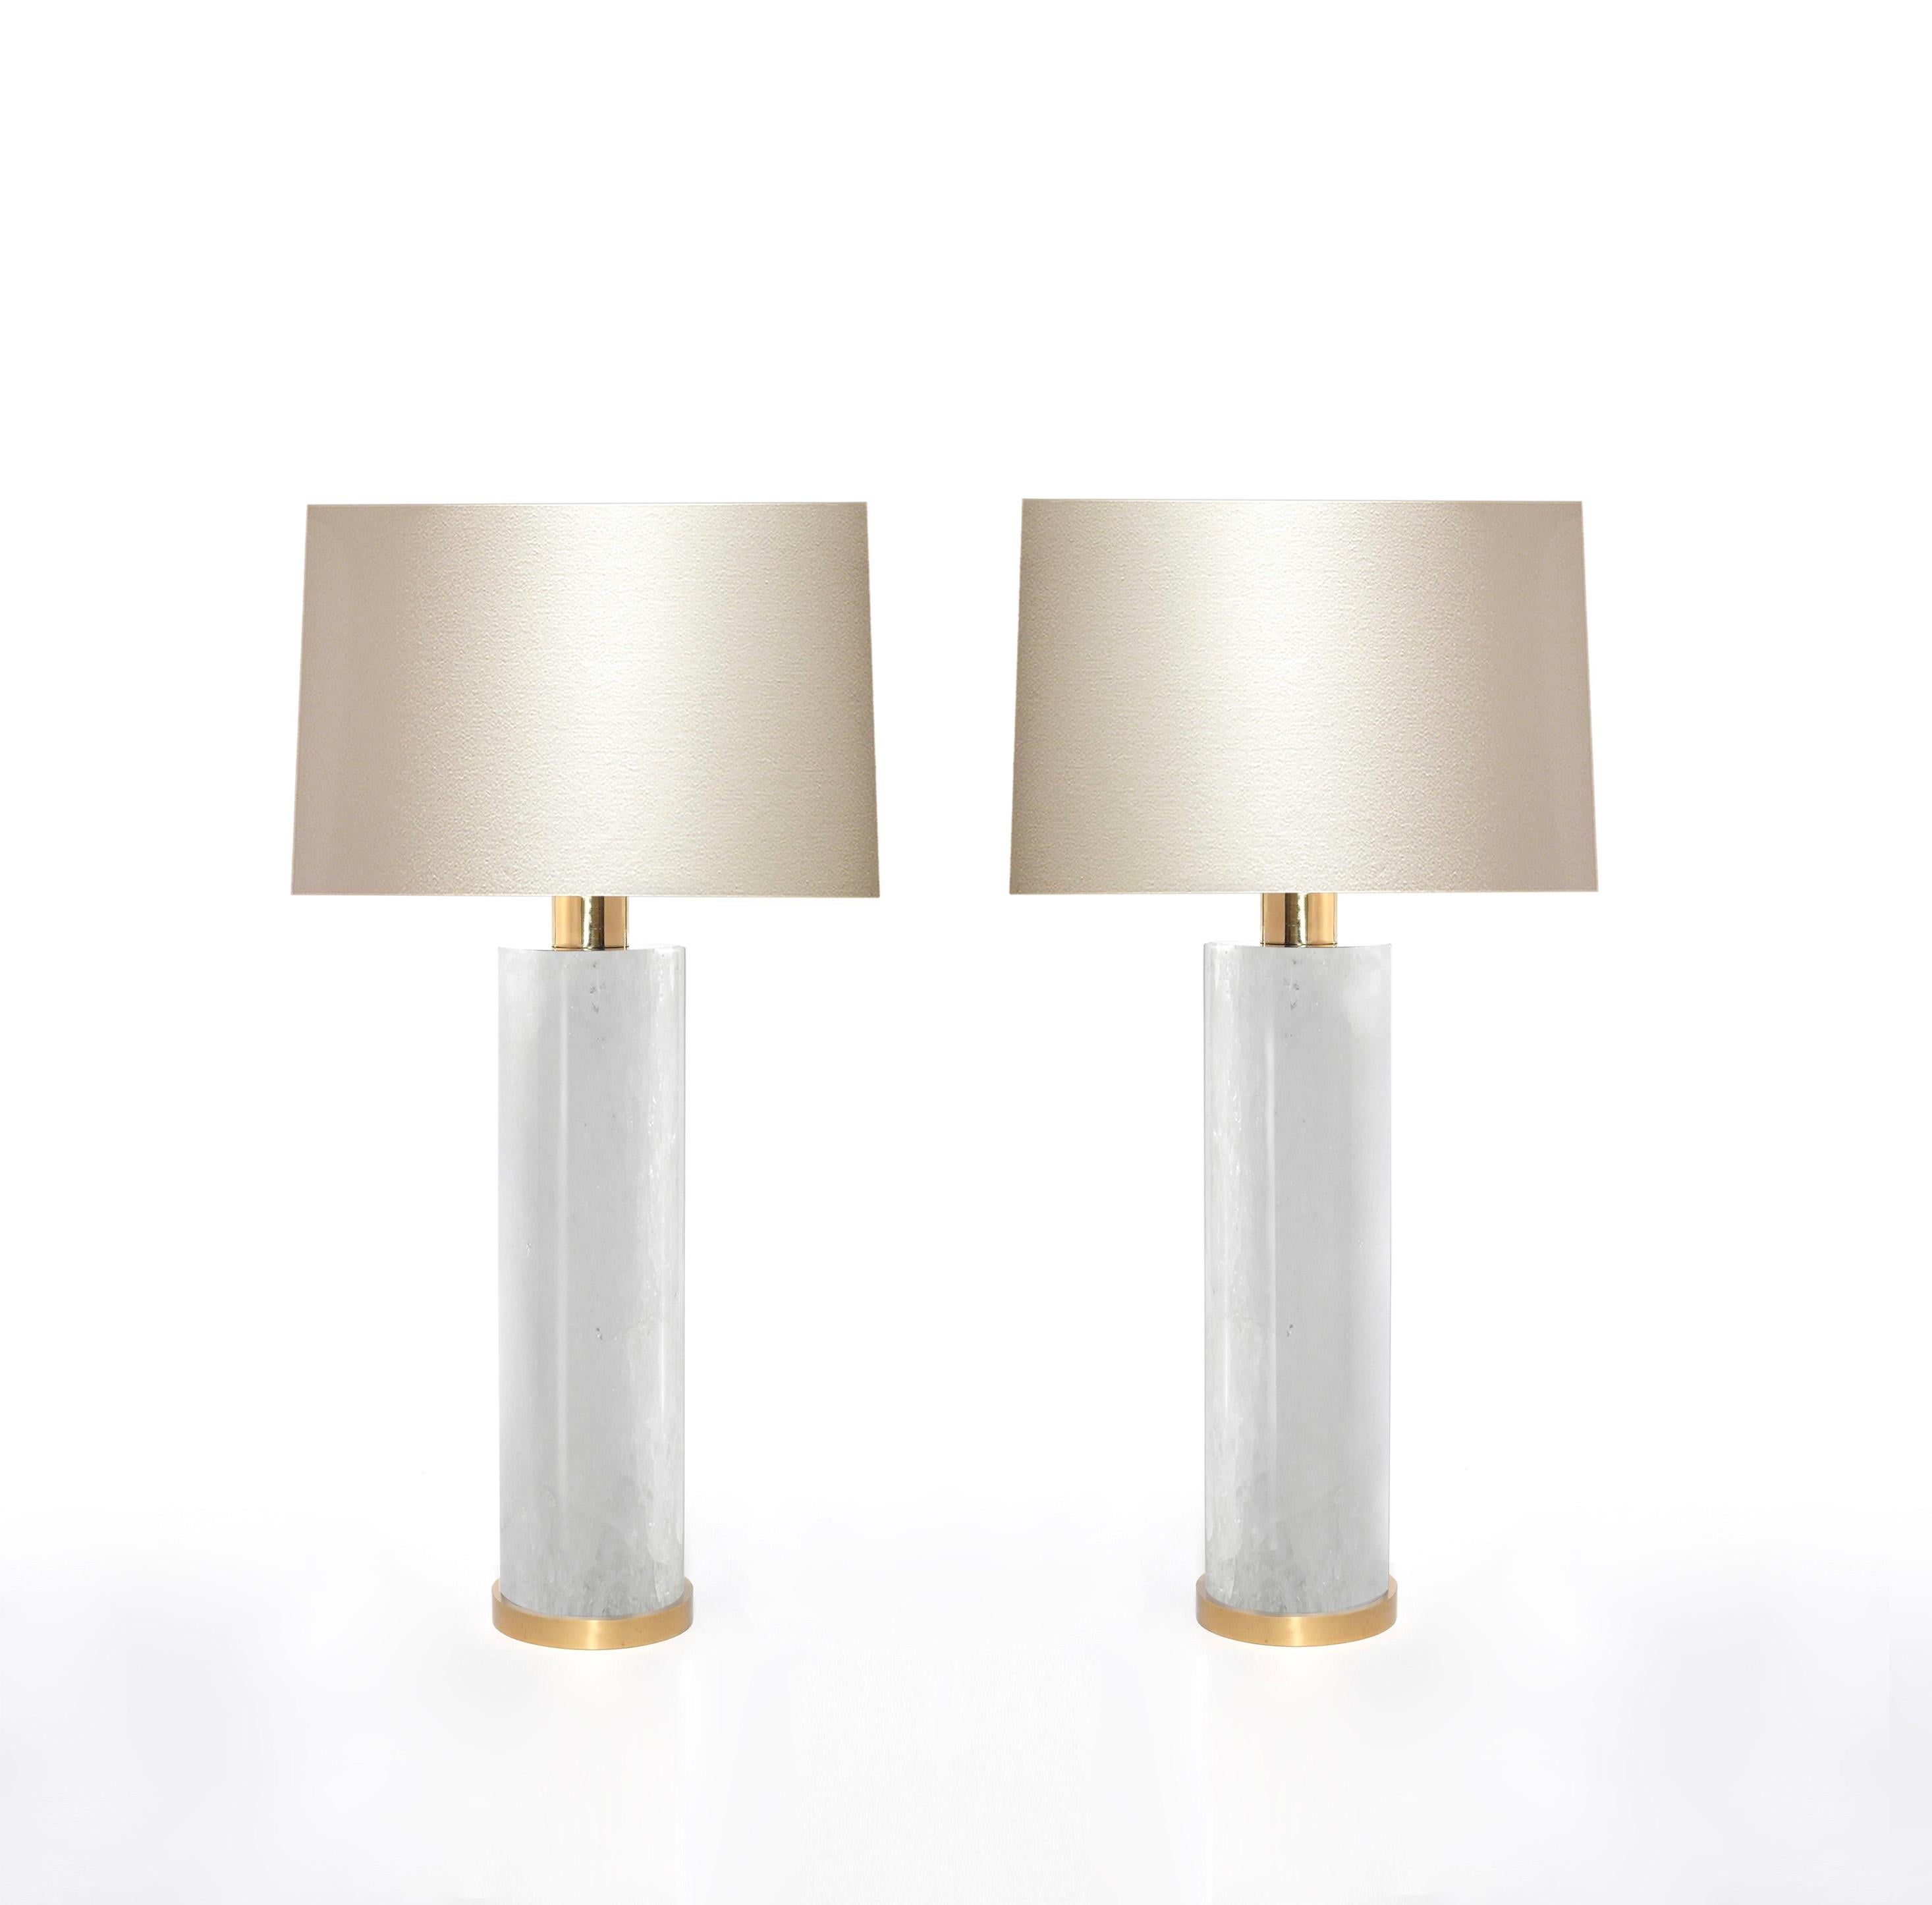 Pair of cylindrical form of rock crystal quartz lamps with polished brass bases. Created by Phoenix Gallery, NYC.
To the rock crystal: 17.5